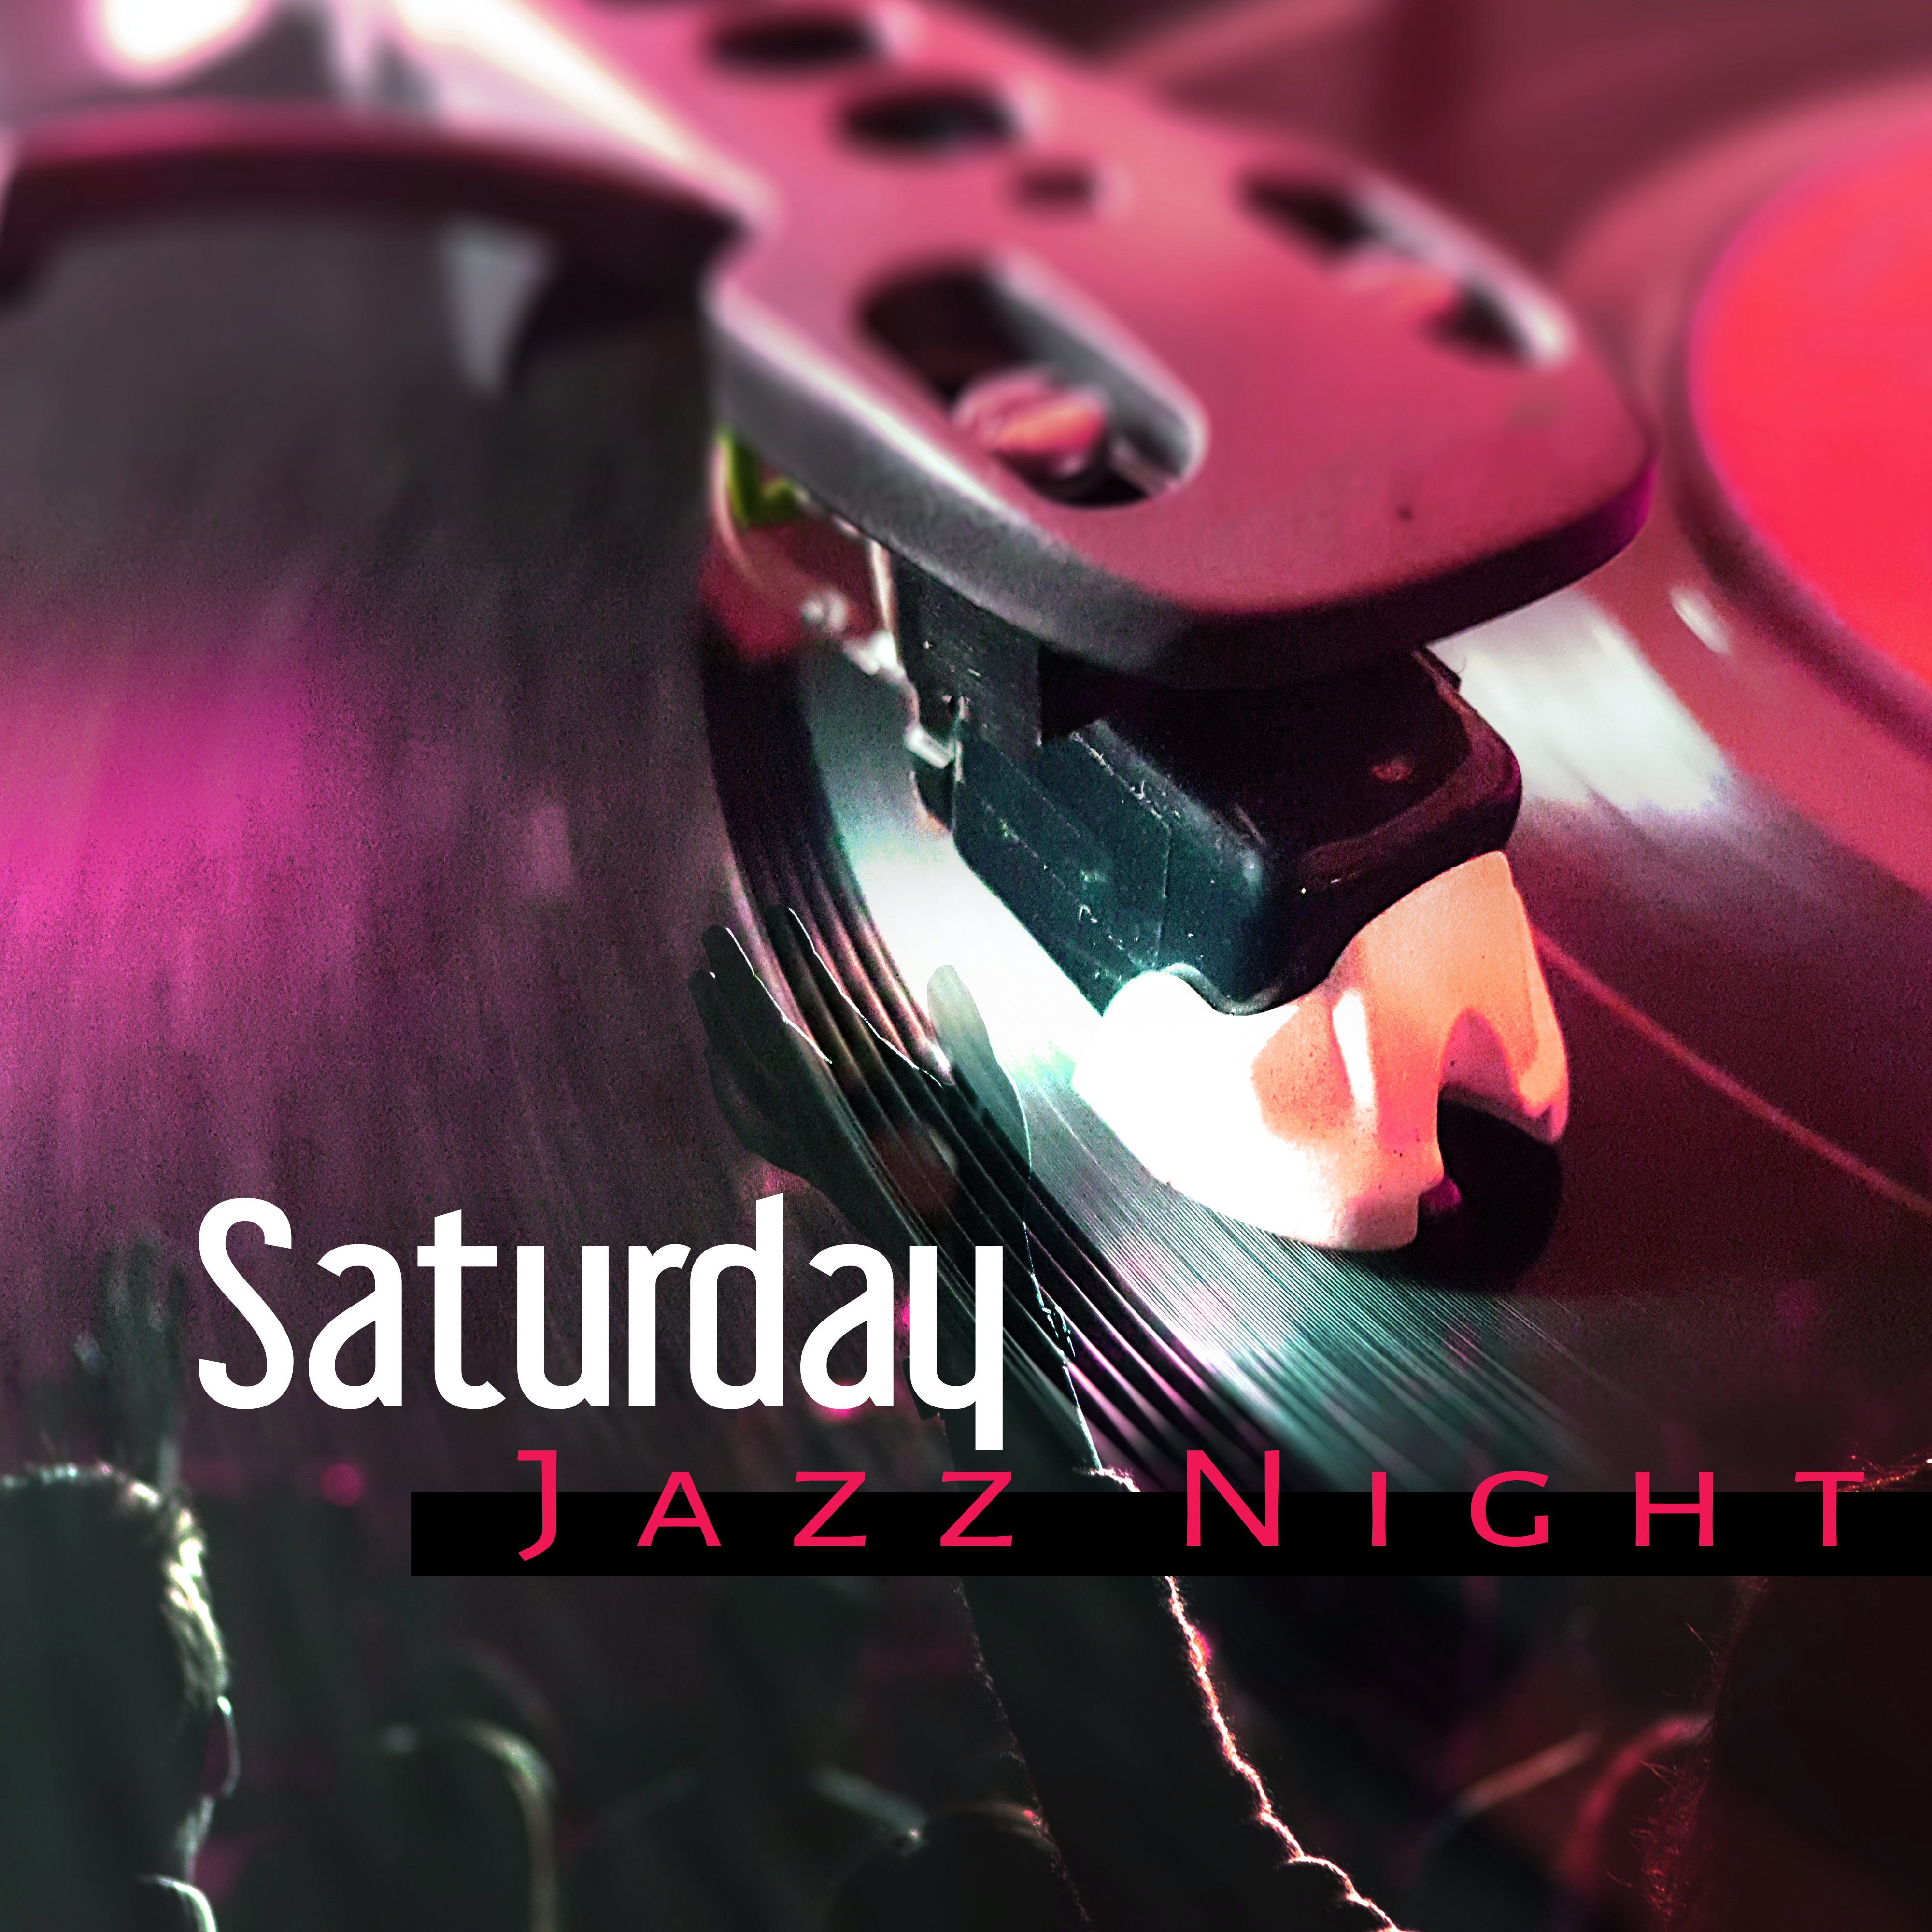 Saturday Jazz Night  Peaceful Music, Chilled Jazz, Instrumental Songs for Relaxation, Stress Free, Cocktail Lounge, Piano Bar